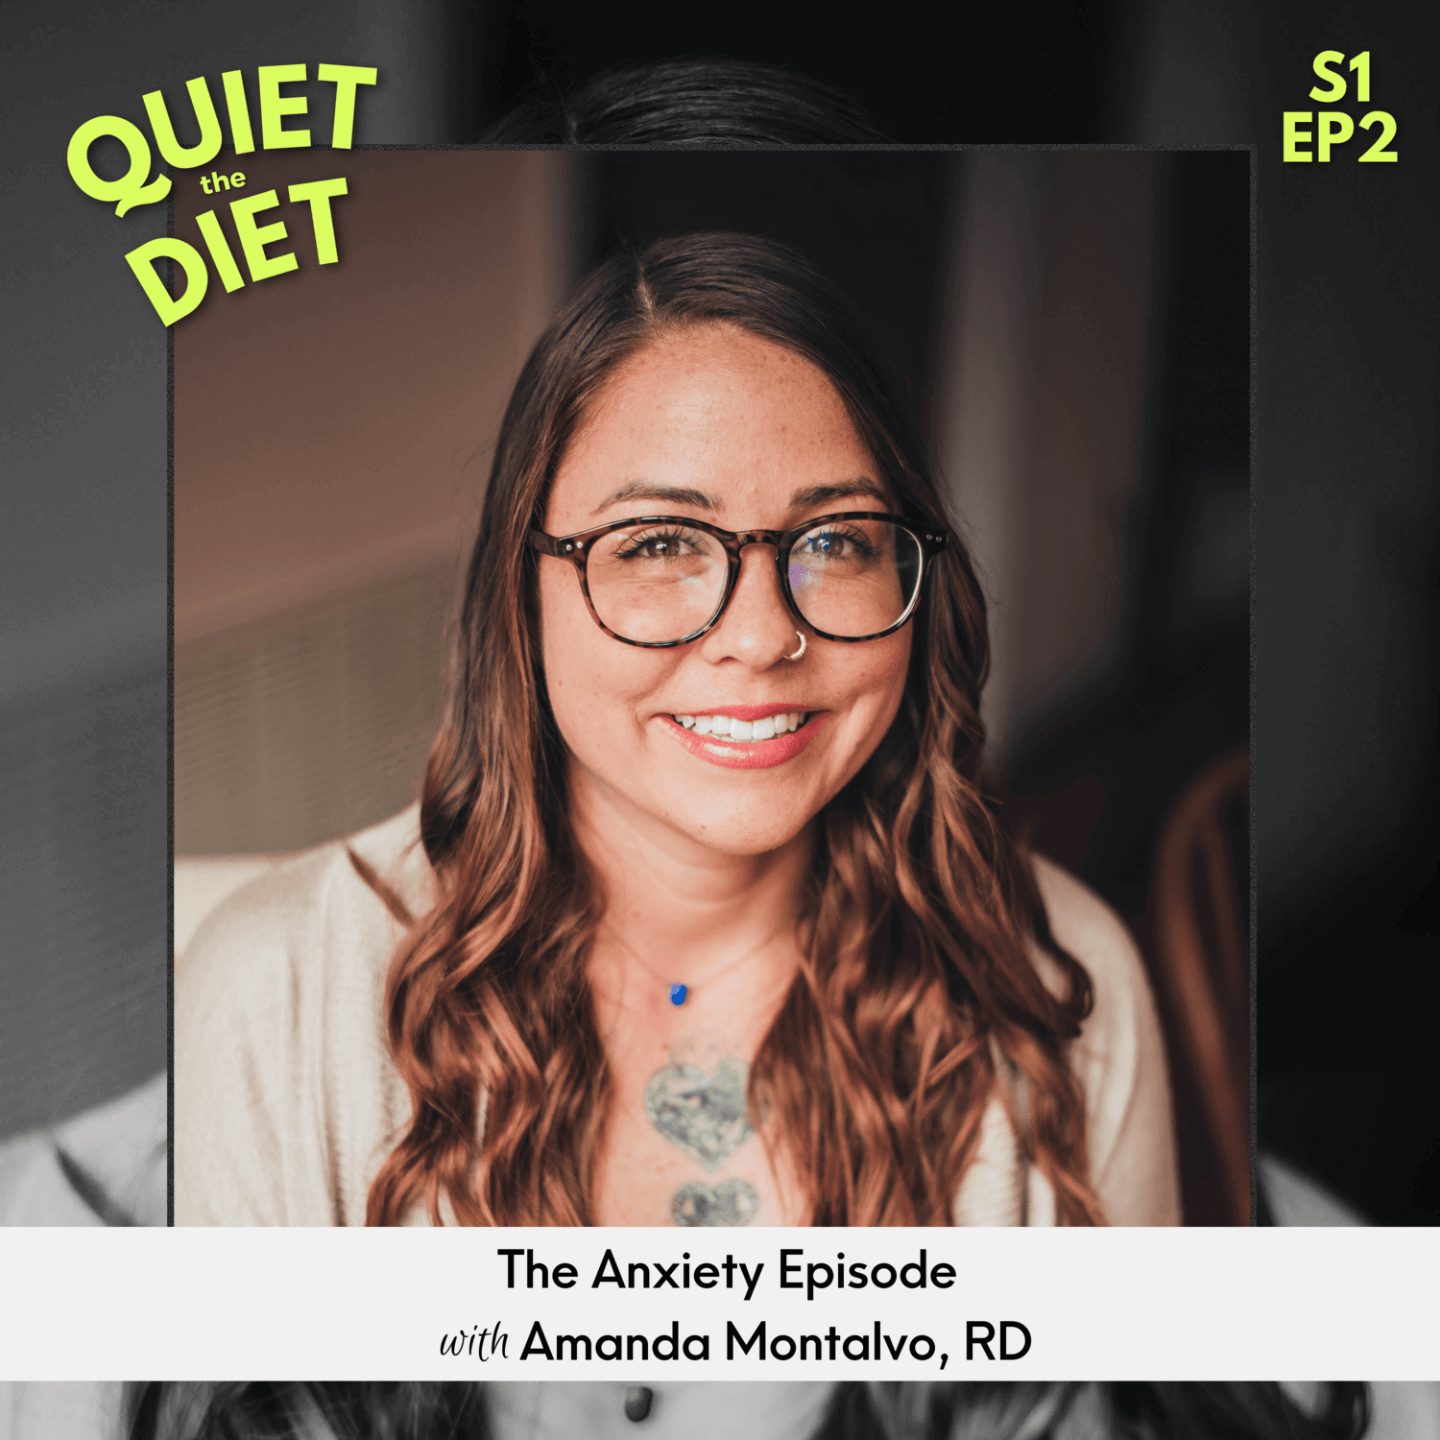 The anxiety episode with Amanda Montalvo RD and Michelle Shapiro RD